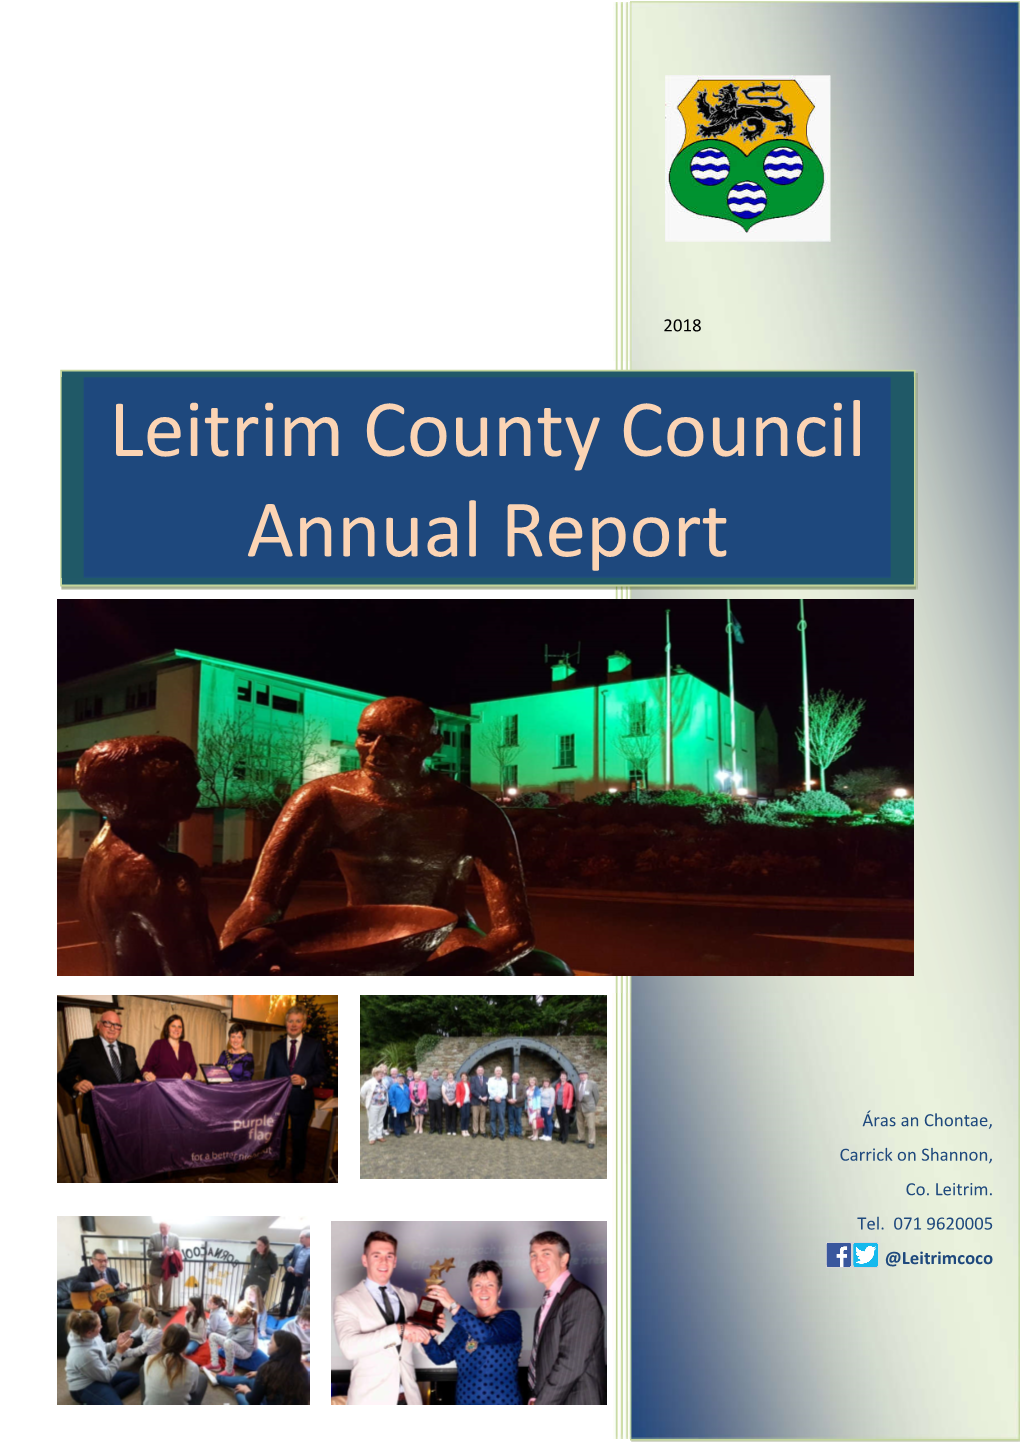 Leitrim County Council Annual Report, 2018 TABLE of CONTENTS